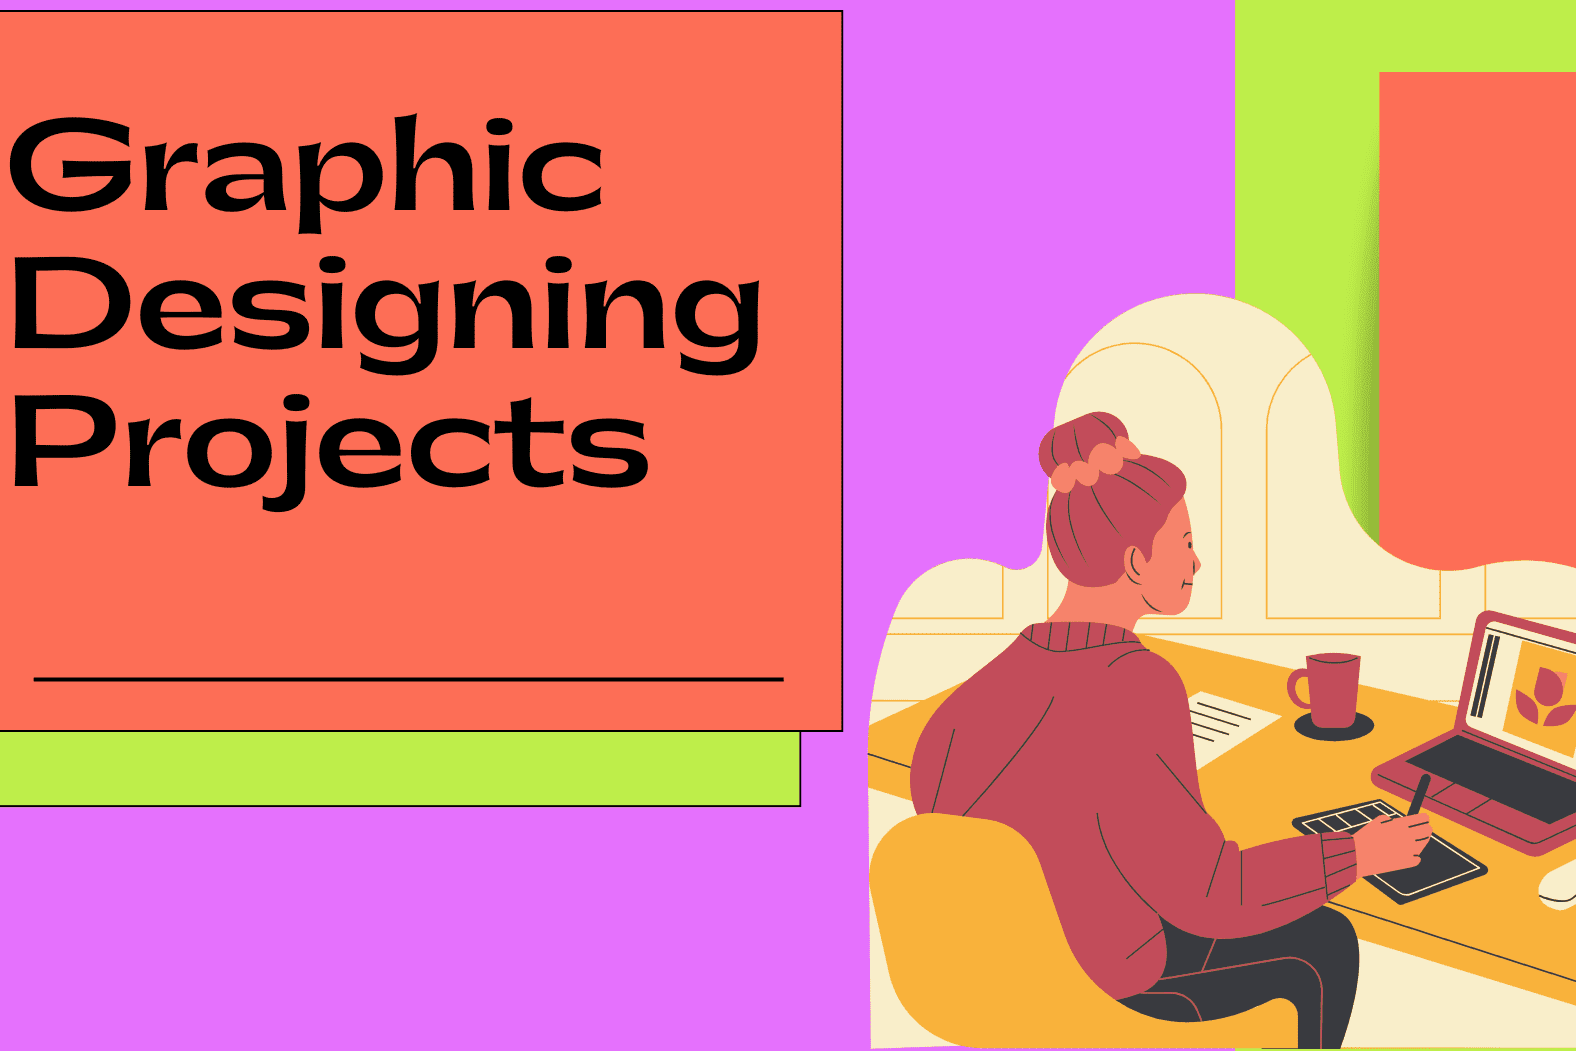 Portfolio for Graphing designing projects (Logos etc)